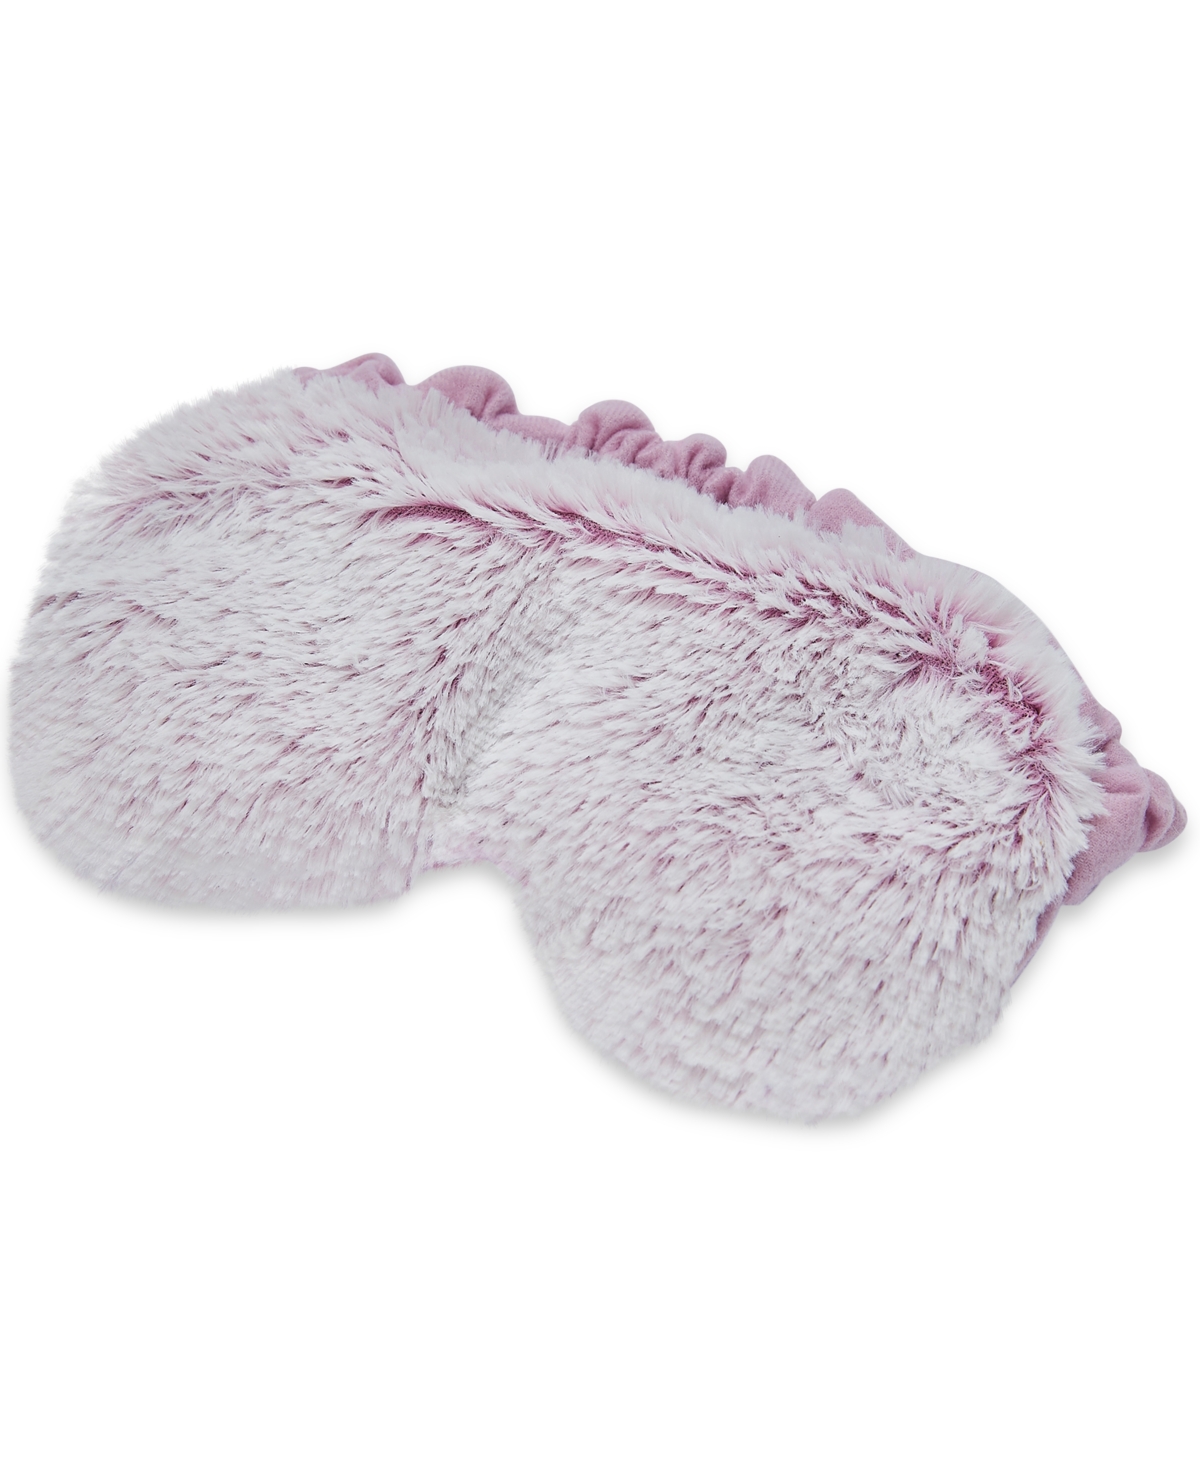 Warmies Microwavable Scented Weighted Eye Mask In Purple